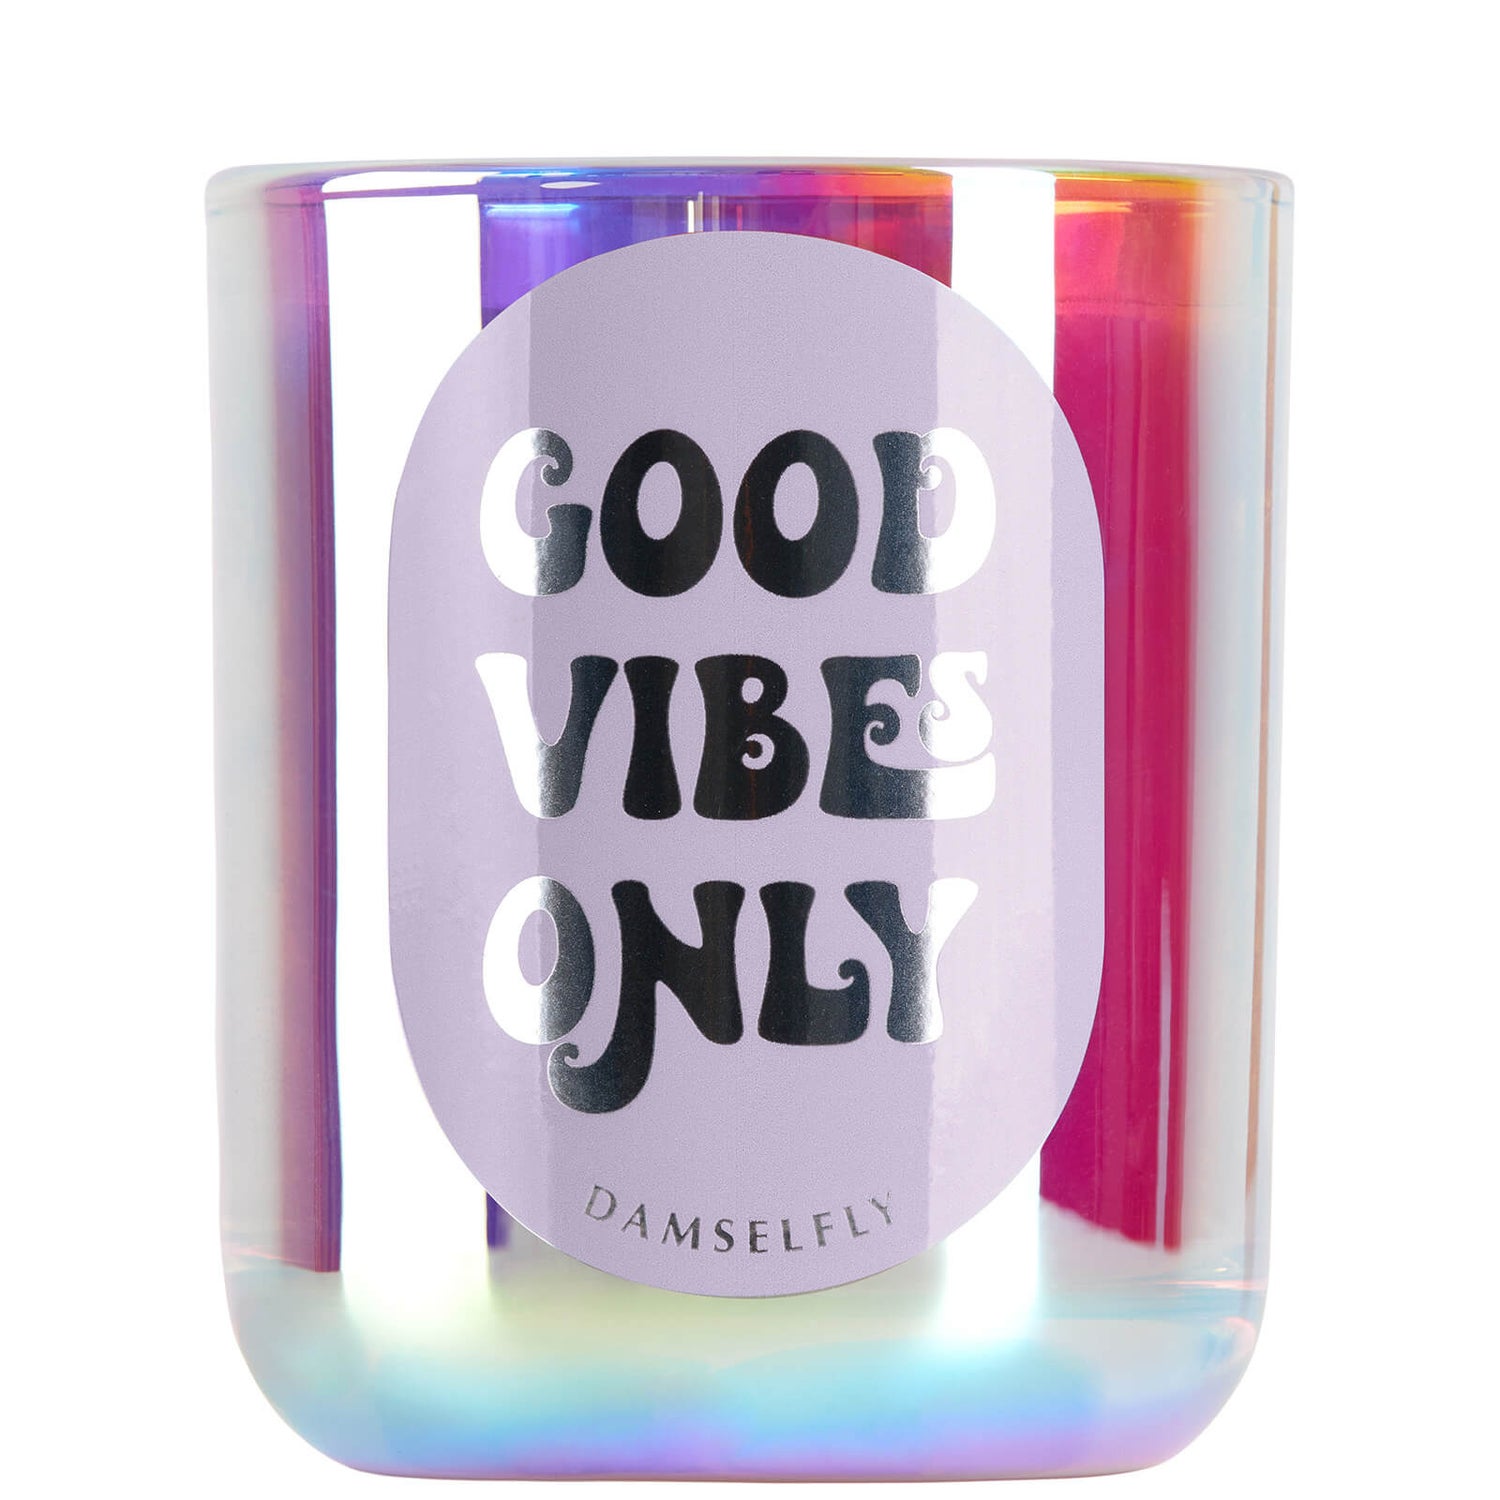 Damselfly Good Vibes Candle 300g